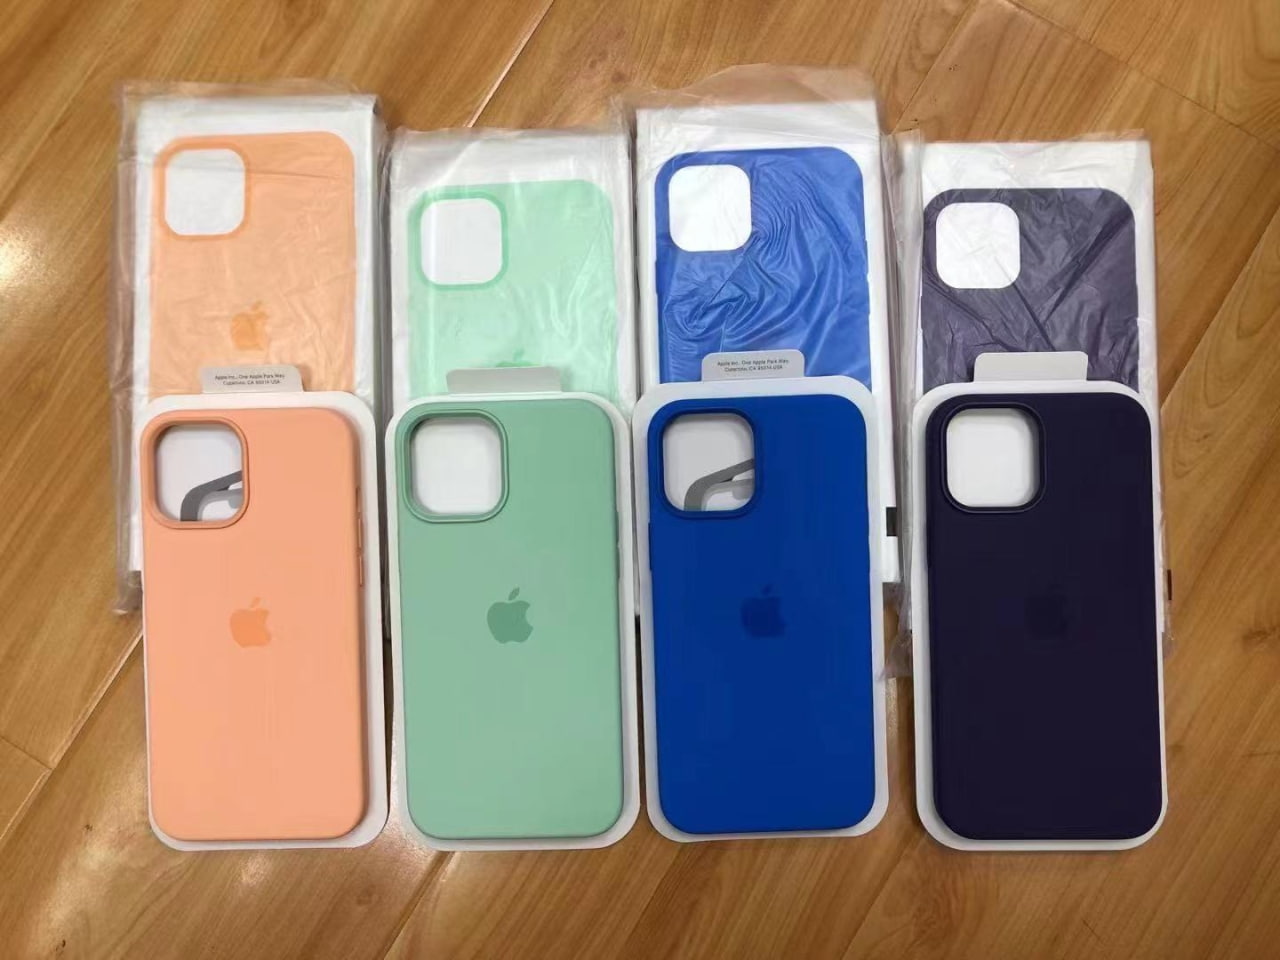 Apple debuts new Spring colors for MagSafe iPhone cases and